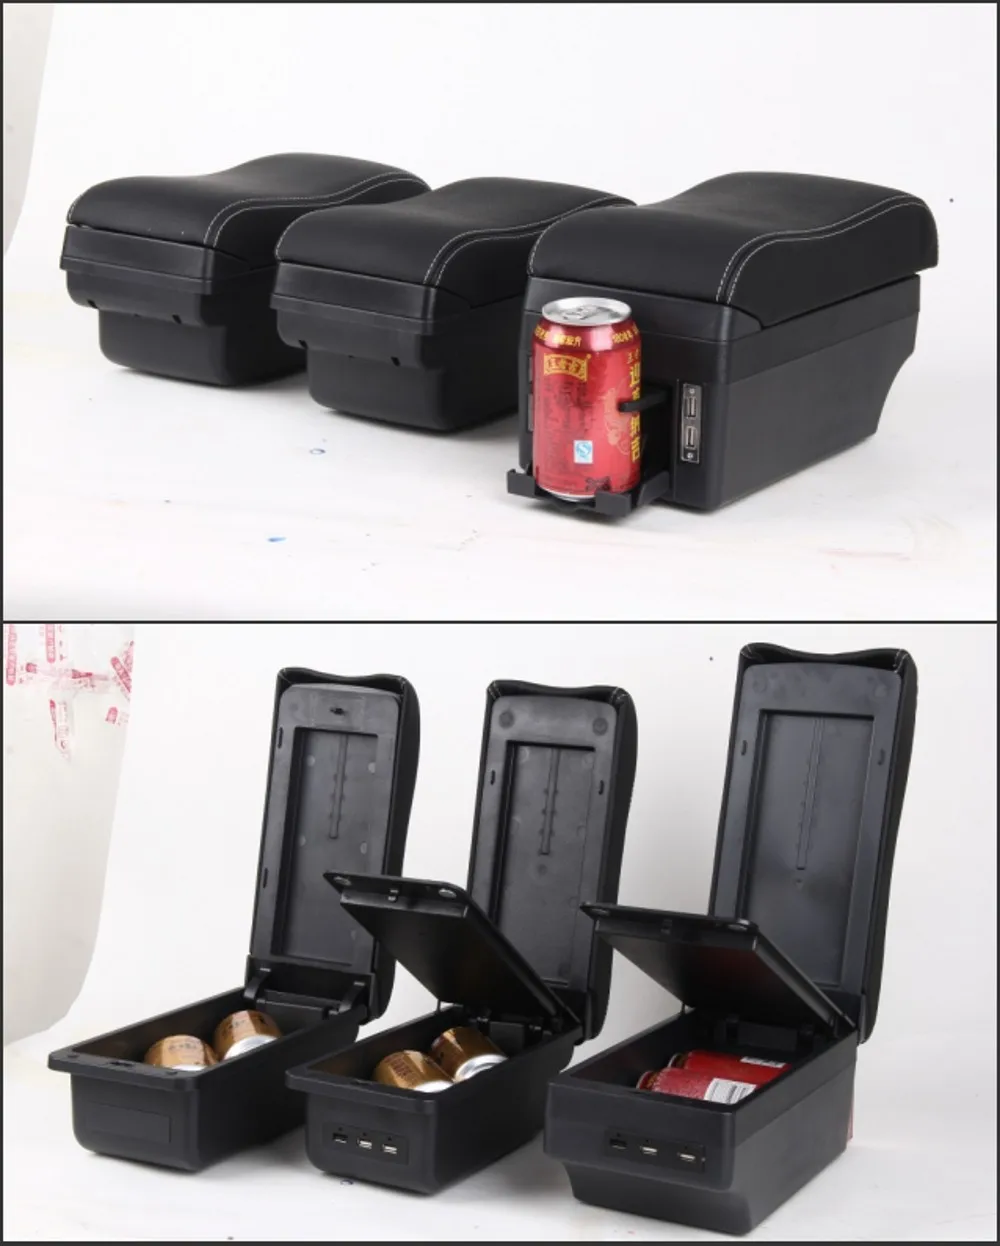 for mazda 2demiomazda2 armrest box central store content box interior armrest storage cup holder car styling accessories free global shipping